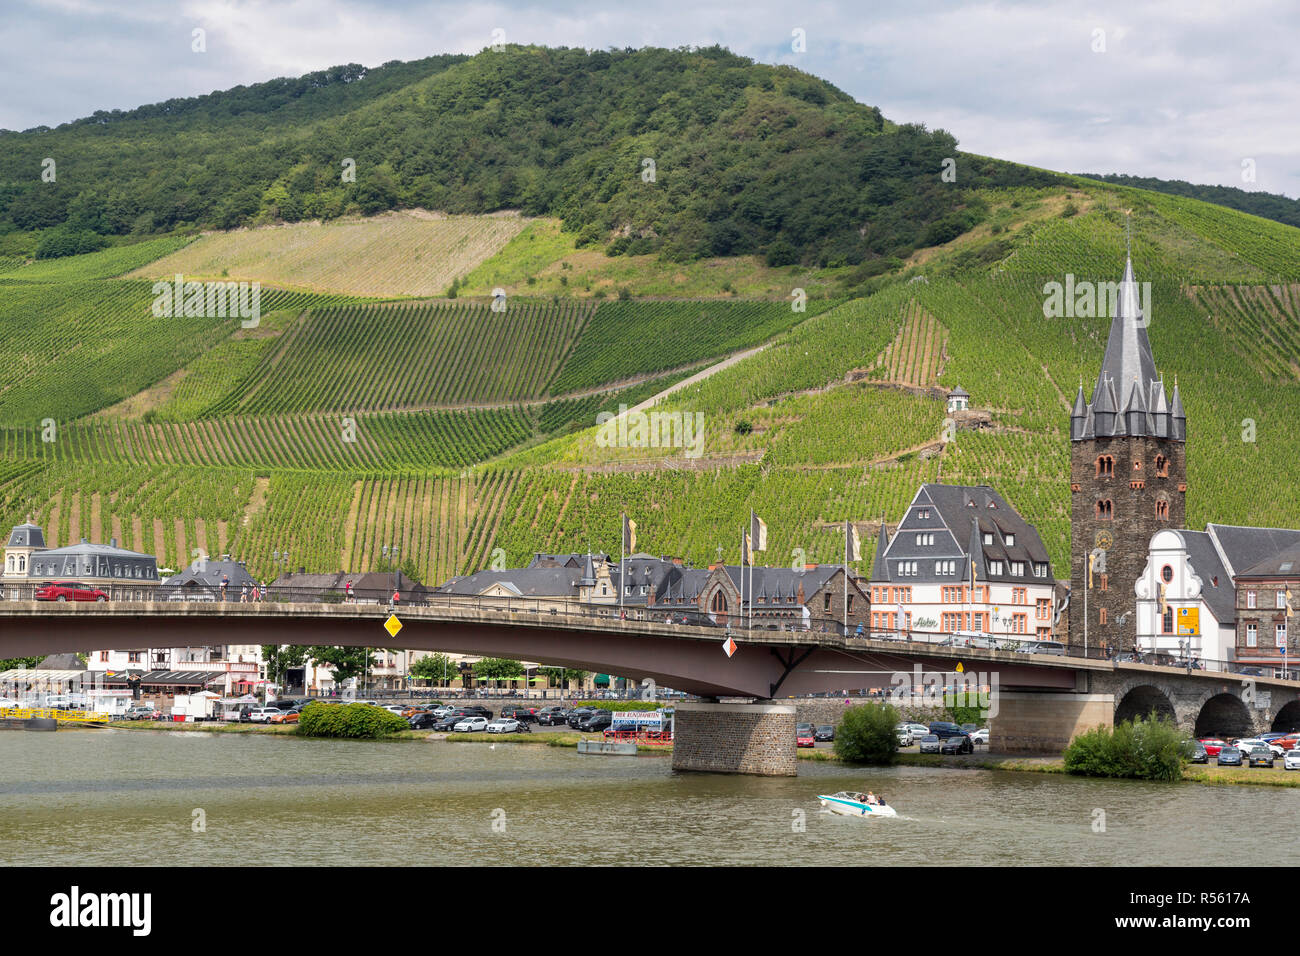 Bernkastel, Germany.  Bridge over the Moselle, Joining Bernkastel and Kues.  St. Michael's Church and Medieval Tower on right. Stock Photo